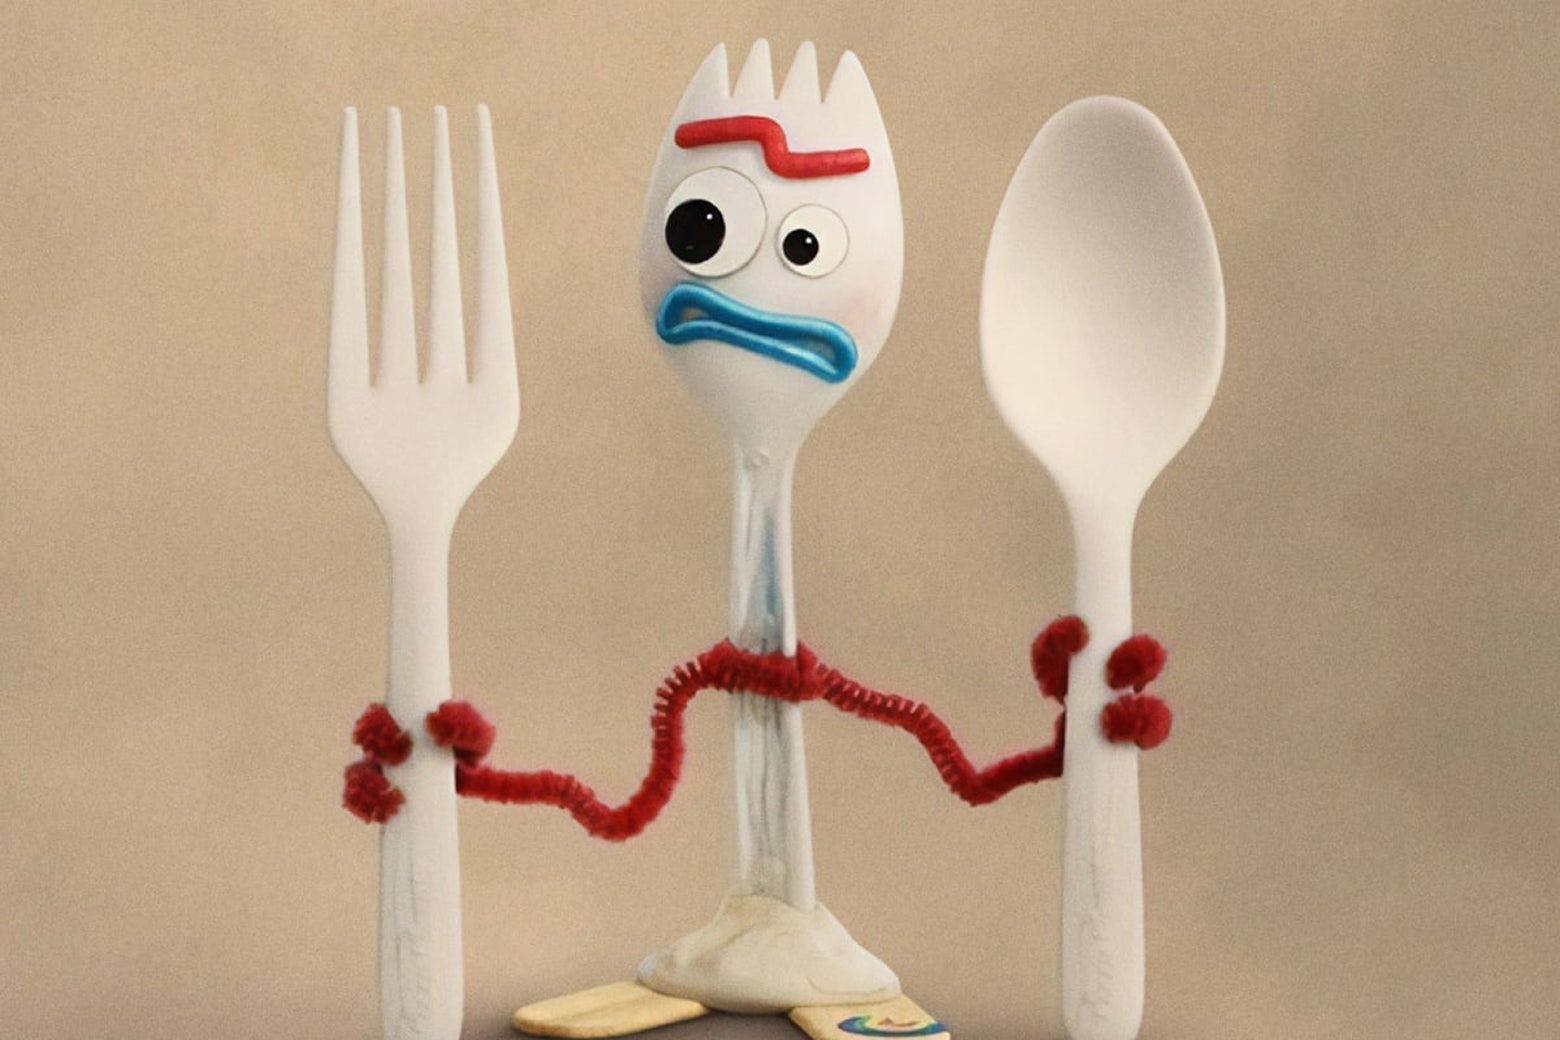 Forky, a toy made from a spork with pipe cleaner arms, holding a plastic fork in one hand and a plastic spoon in the other, looking disgusted.